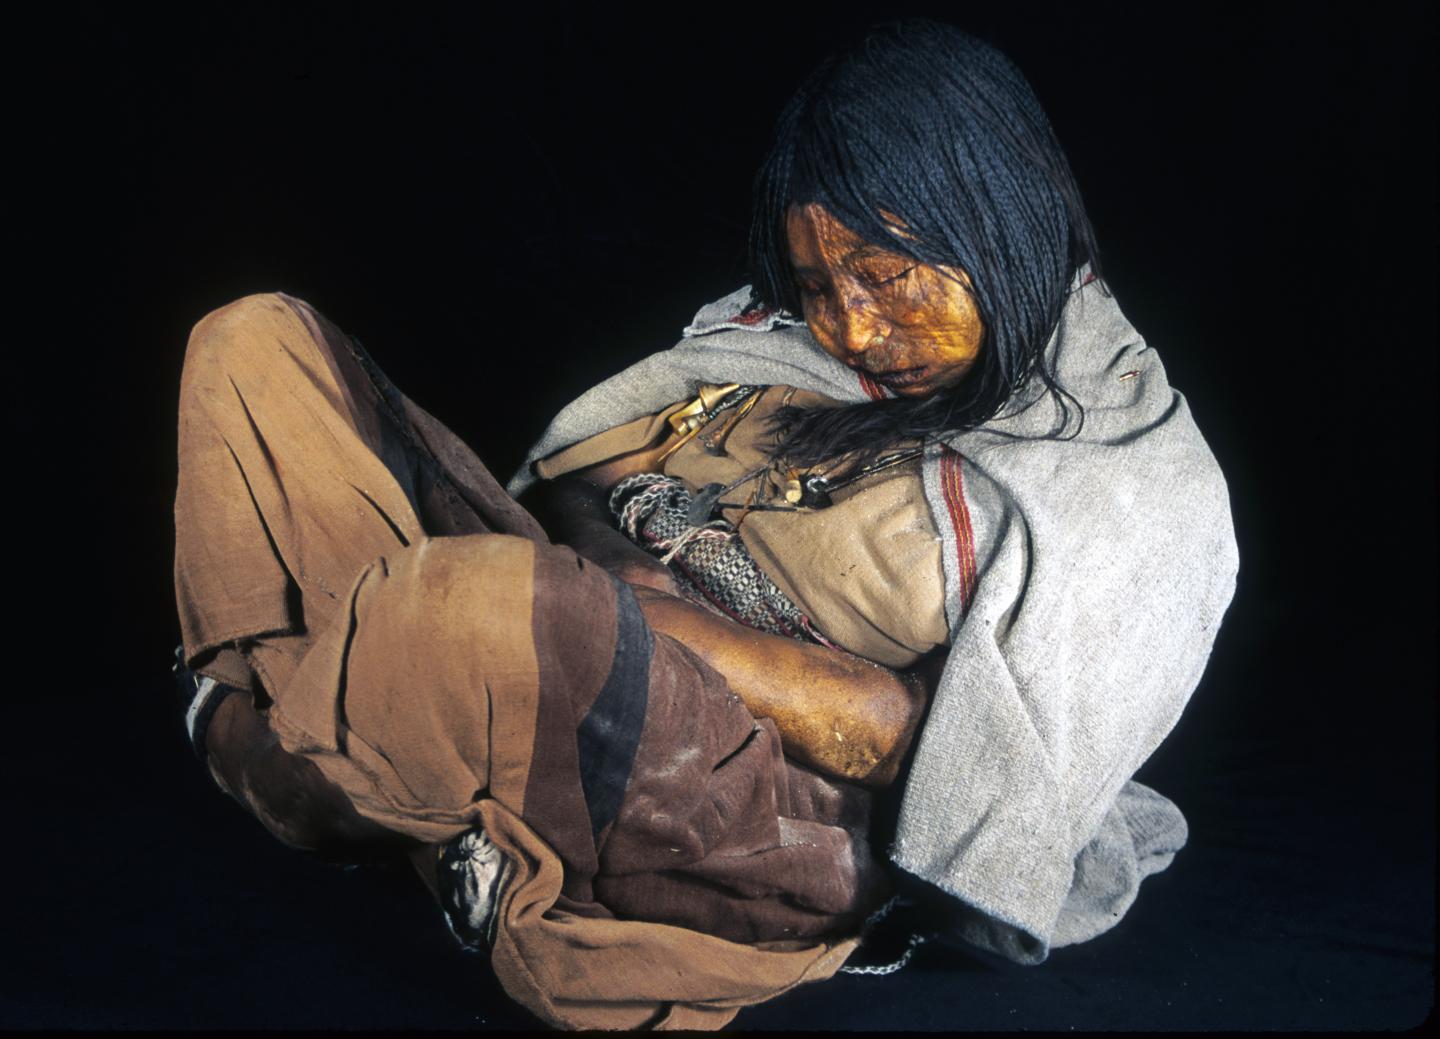 La Doncela (The Maiden) is an Incan mummy that was found at Mount Llullaillaco in Argentina in 1999. The girl died 500 years ago during a ritual sacrifice.